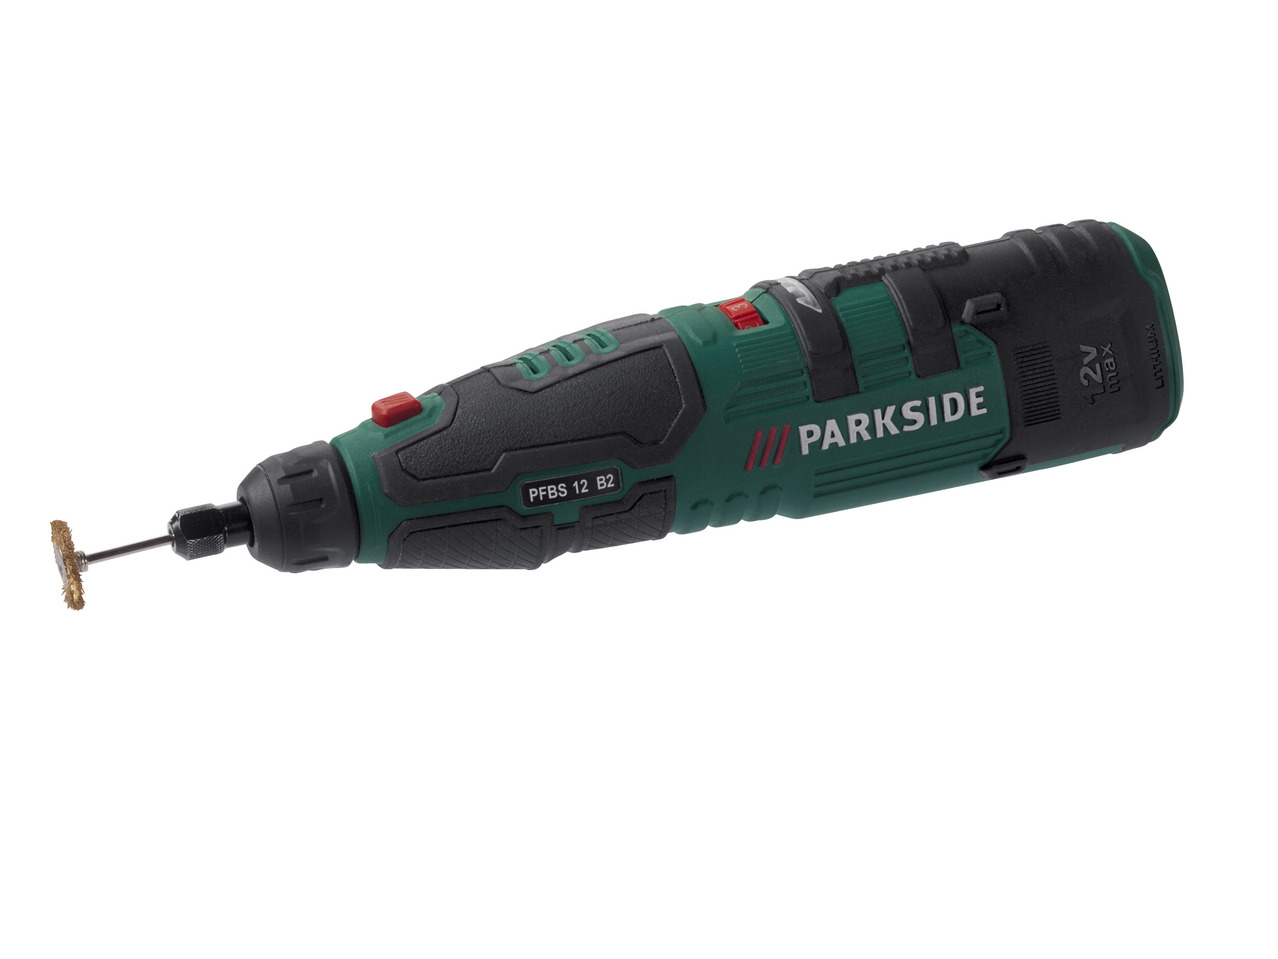 PARKSIDE Cordless Rotary Tool